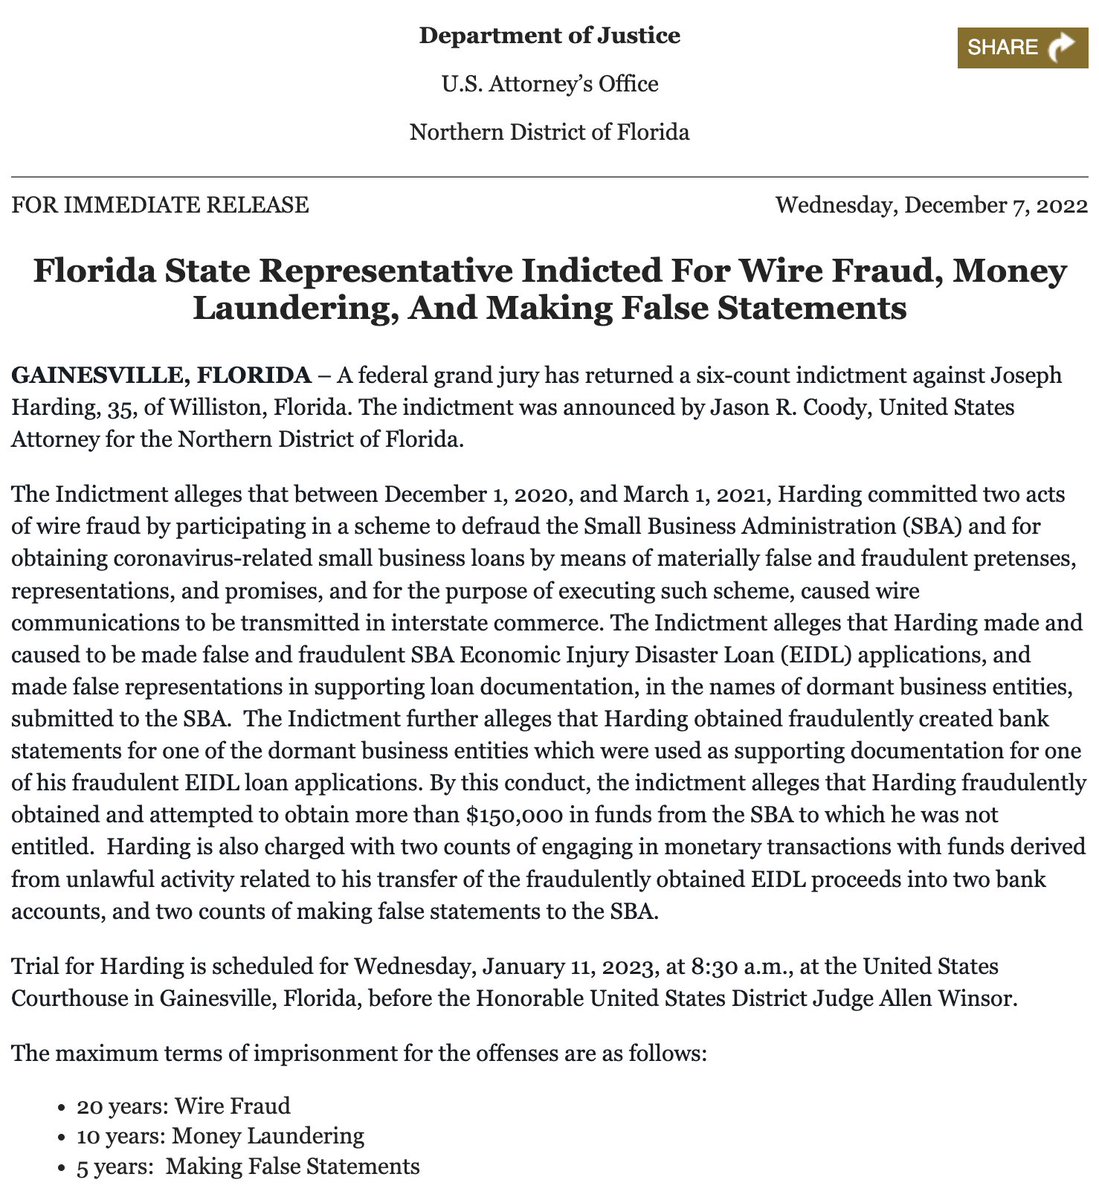 NEW: Florida State Representative Joseph Harding, the Republican who introduced the 'Don't Say Gay' bill, has been criminally indicted by the Justice Department for wire fraud, money laundering, and making false statements.